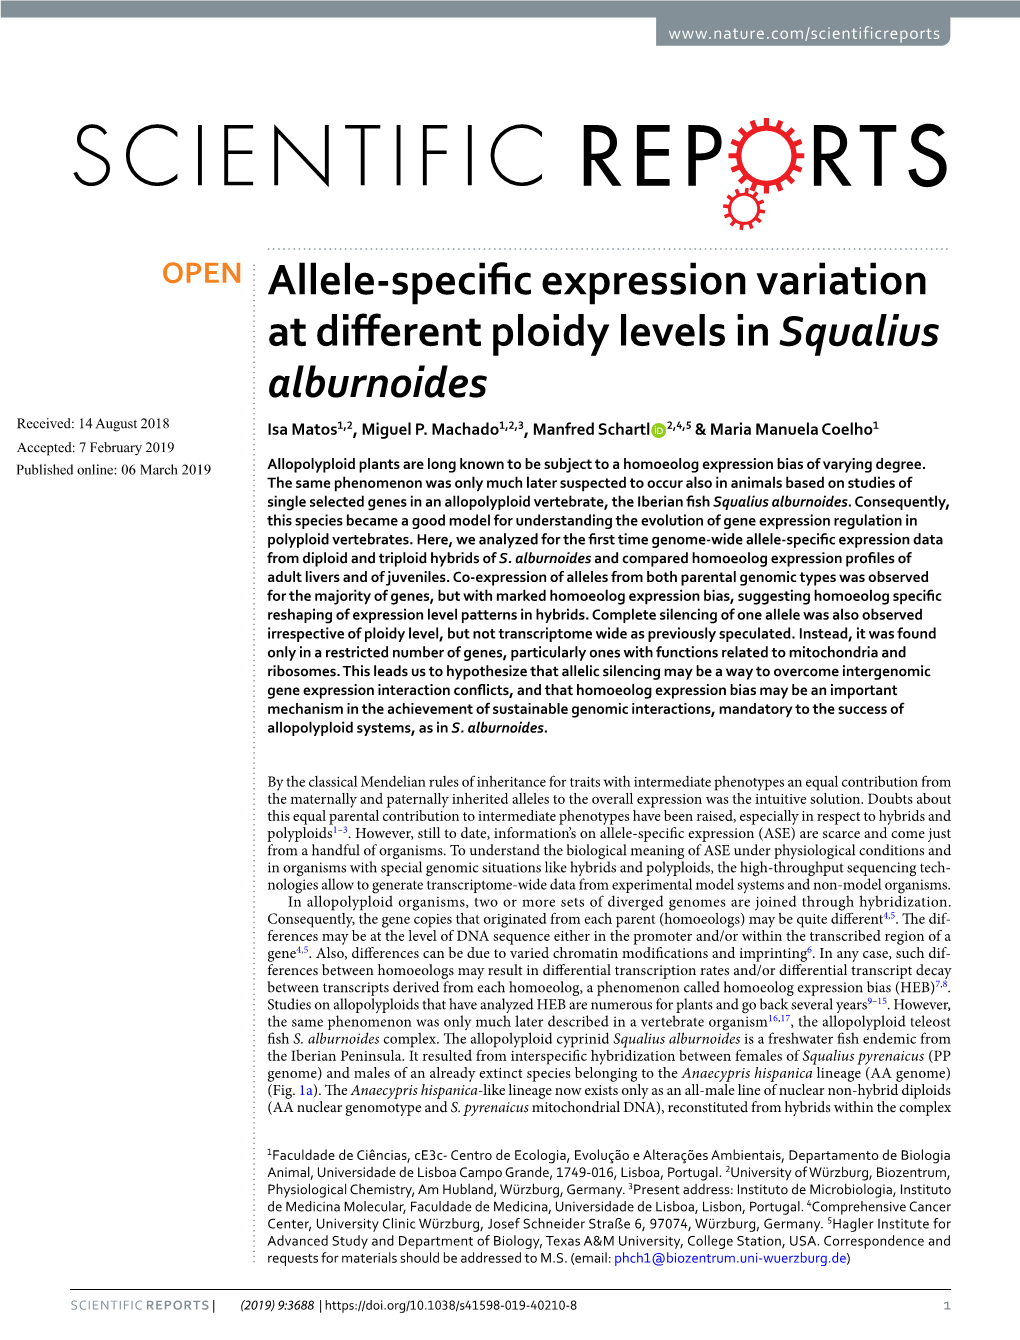 Allele-Specific Expression Variation at Different Ploidy Levels in Squalius